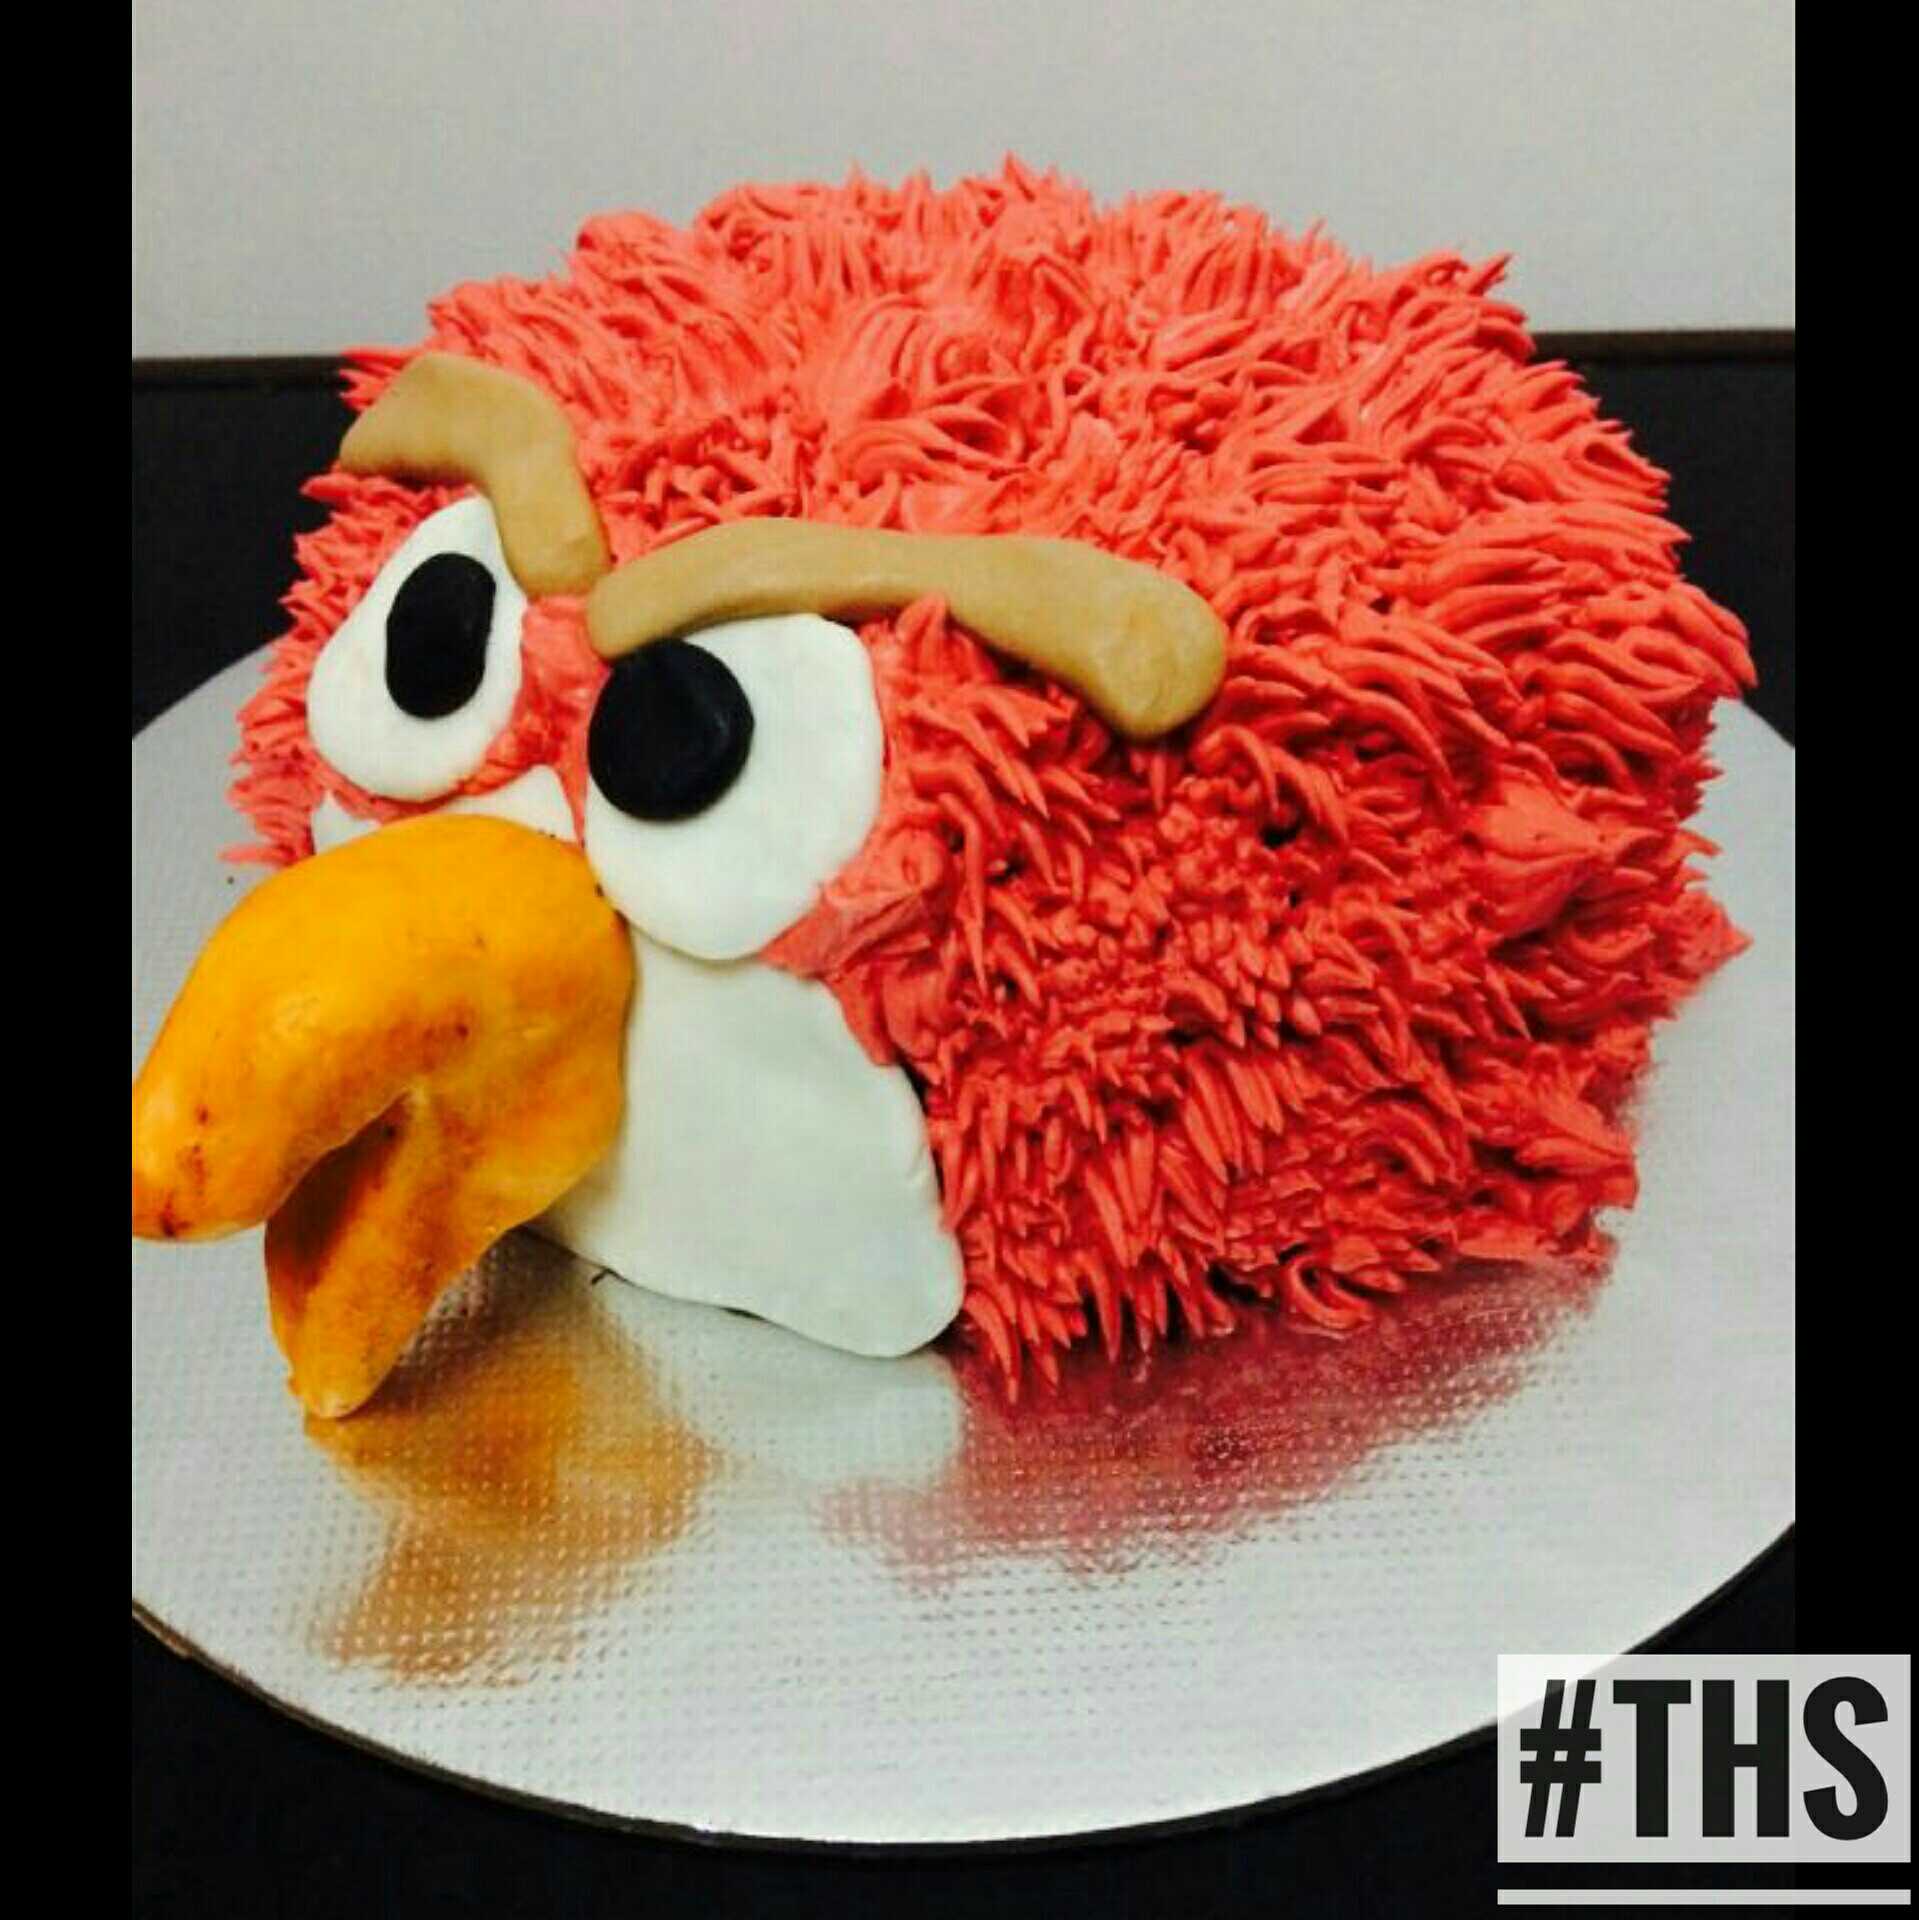 Red Velevet AngryBird Cake Decorated With Red Italian Meringue Buttercream